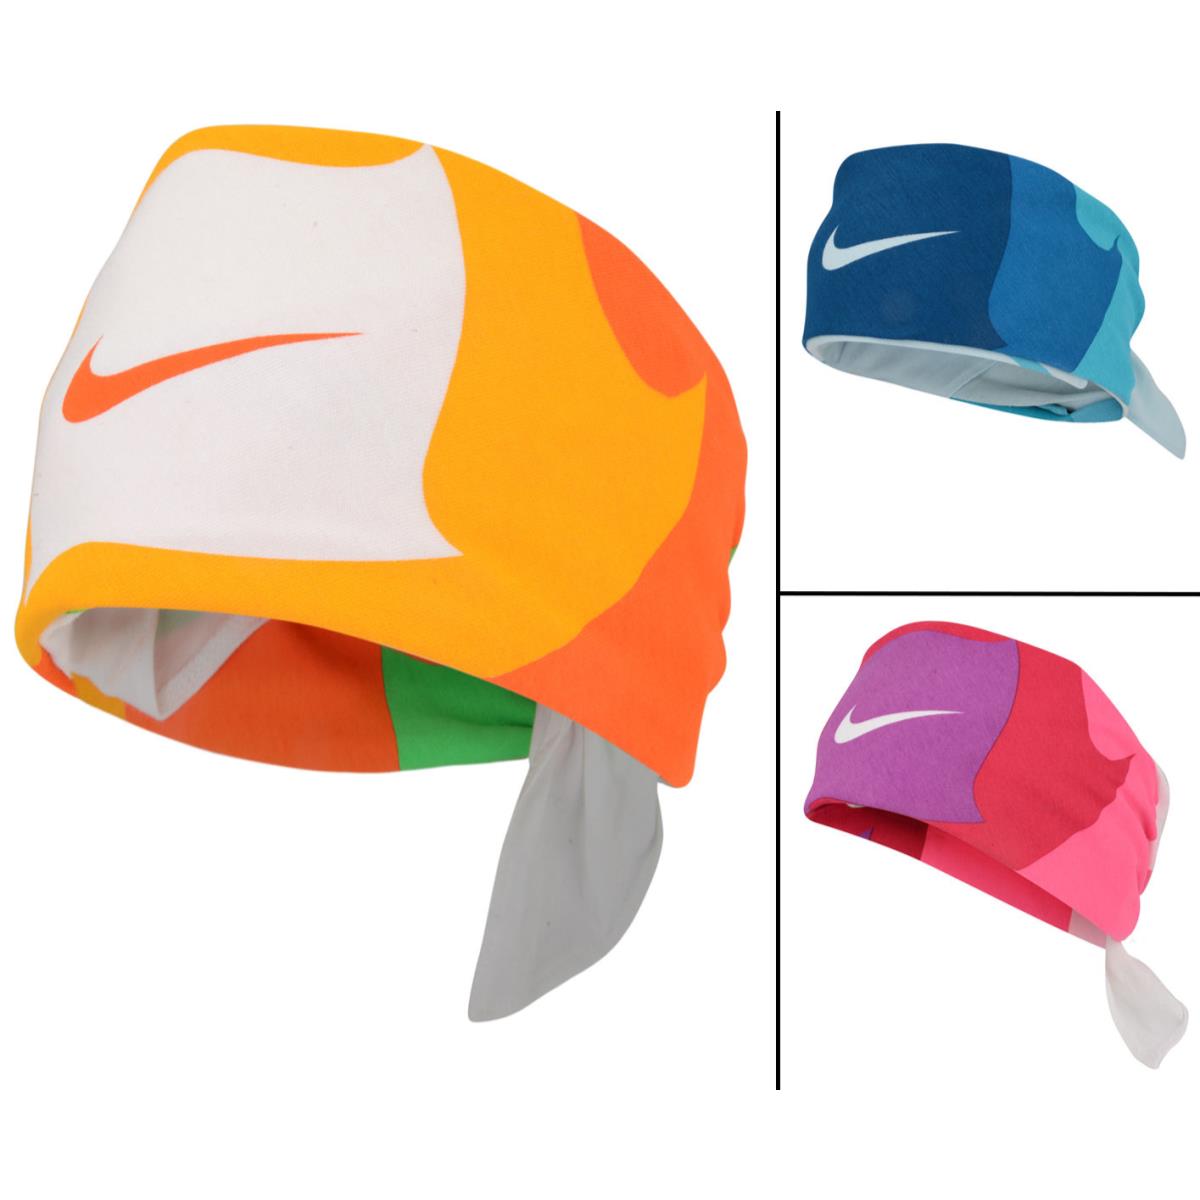 http://www.pmcsports.co.uk/images/productzoomin/Nike%20Bandana%203%20colour%20pack.jpg